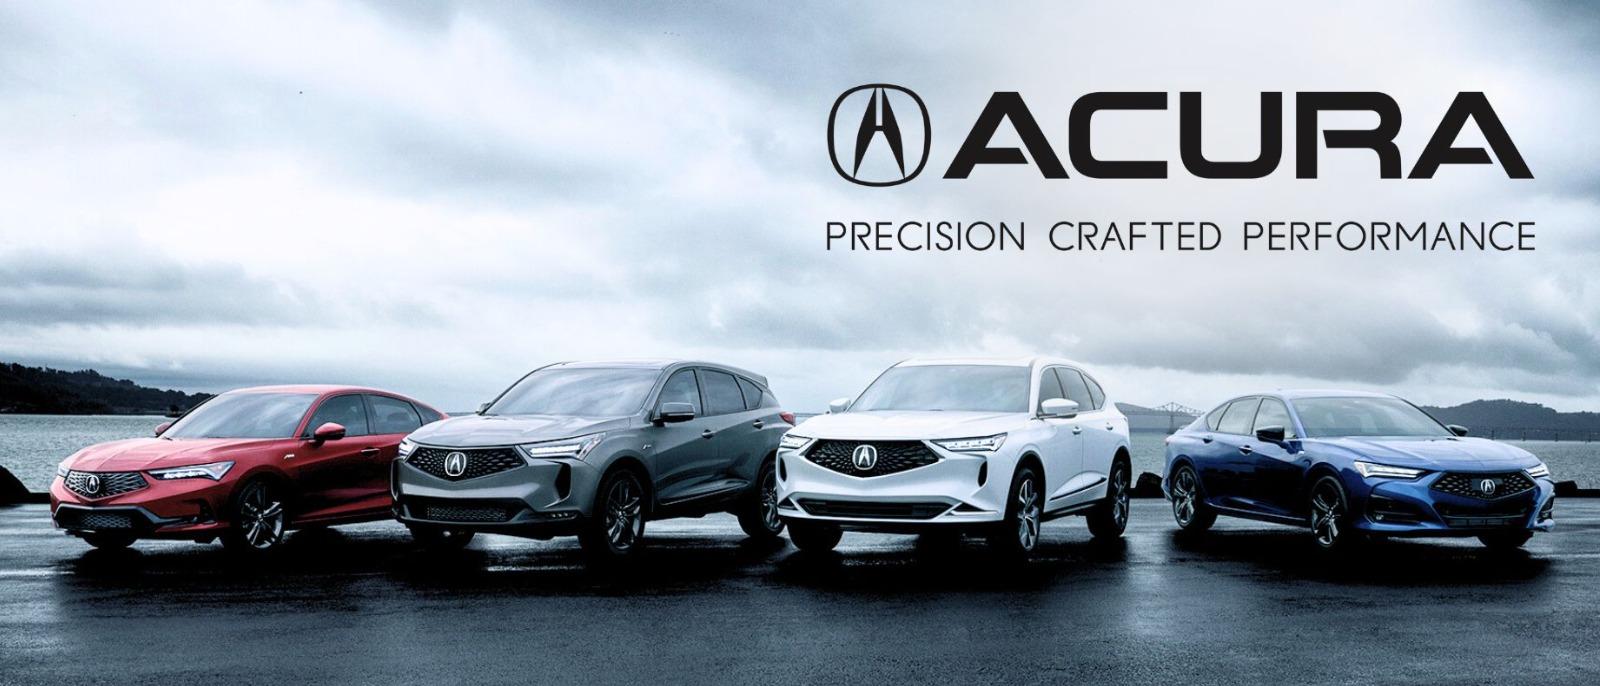 Grubbs proudly sells Acura vehicles